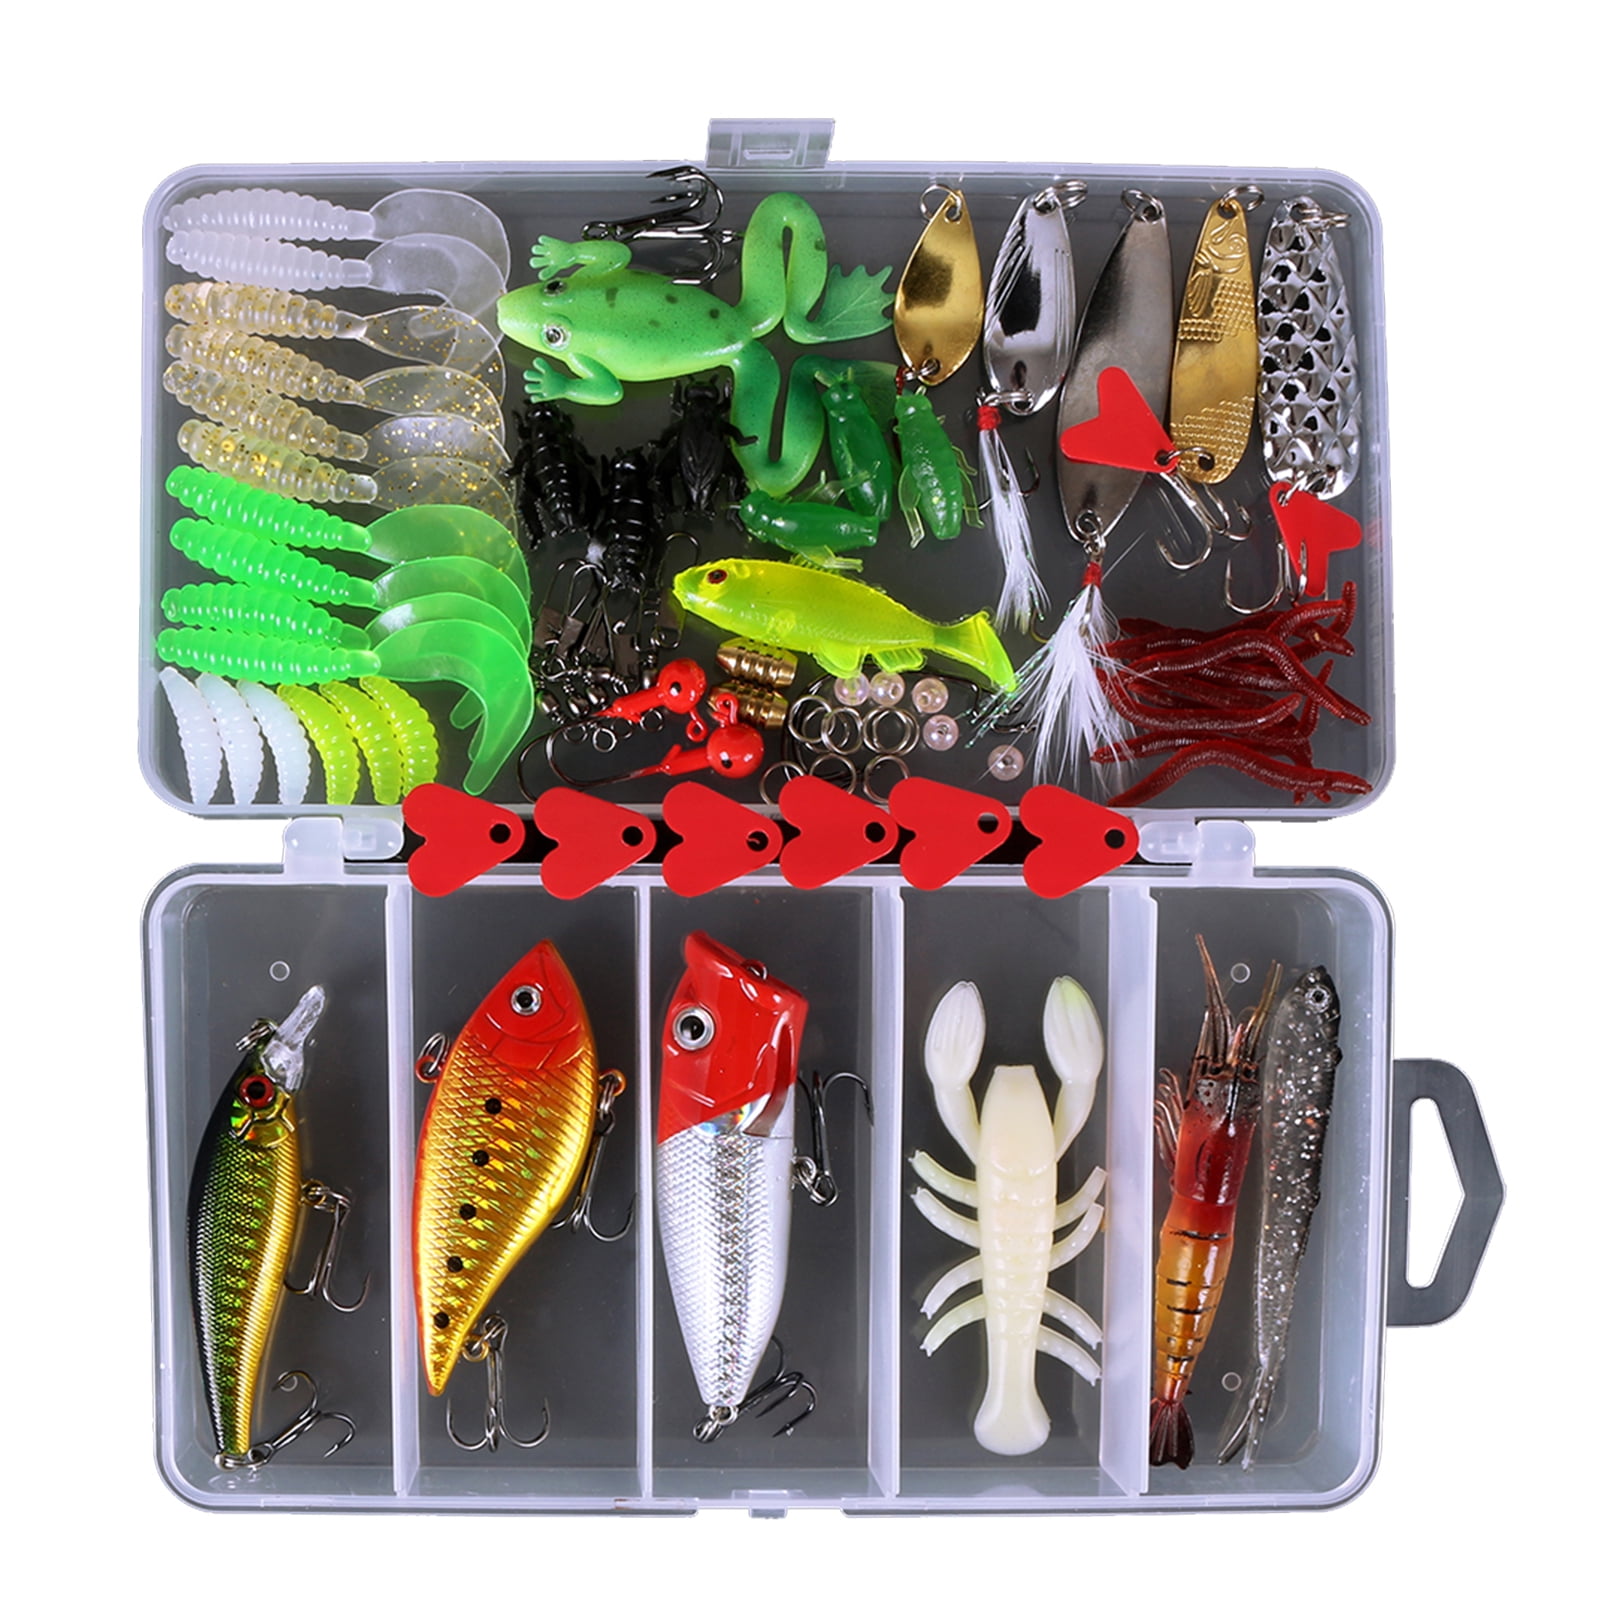  Trout Magnet 82 Piece Neon Fishing Kit, Catches All Types of  Fish, Includes 70 Grub Bodies And 12 Size 8 Hooks,  Orange,Green,White,Silver : Trout Magnets : Sports & Outdoors